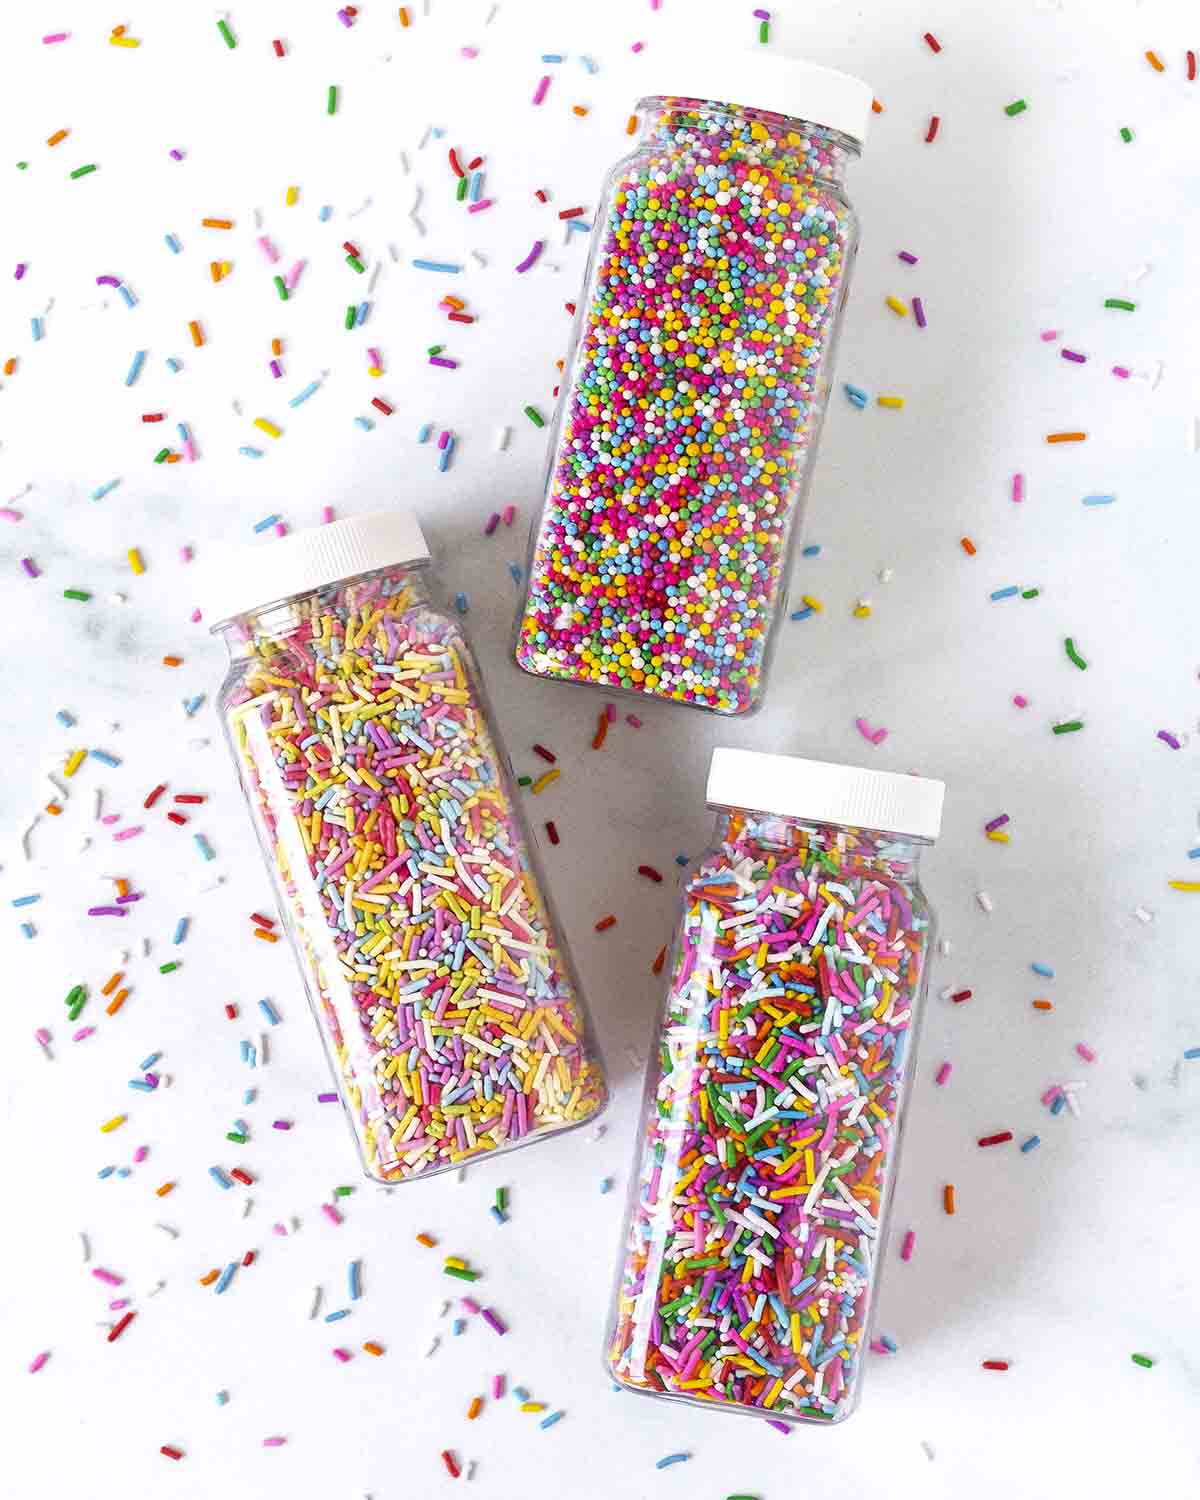 An overhead shot of three jars of gluten-free sprinkles, the jars are on a white table.